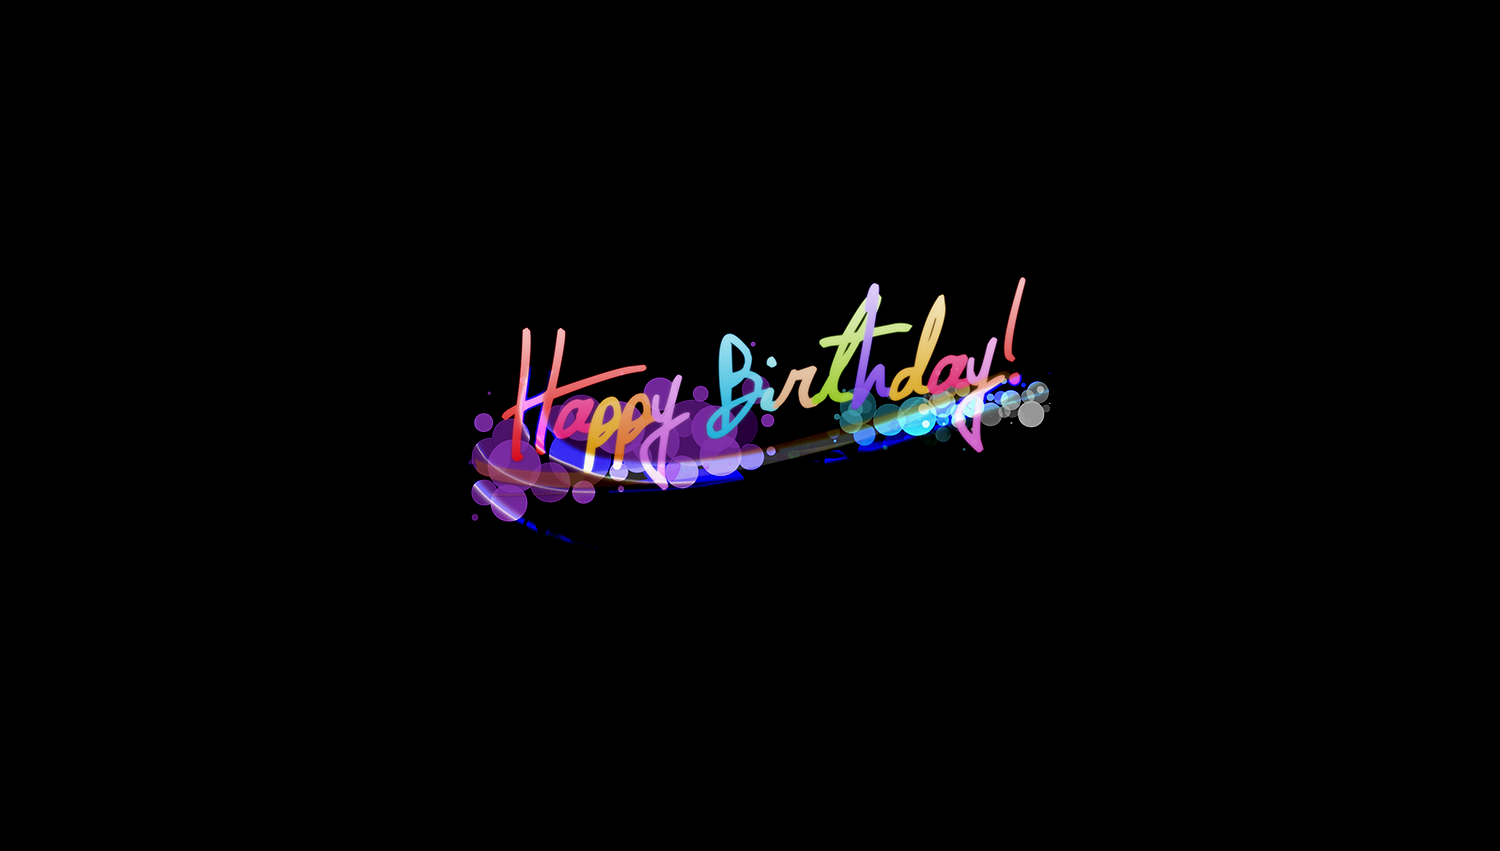 Happy Birthday Wallpapers Download Free High Definition